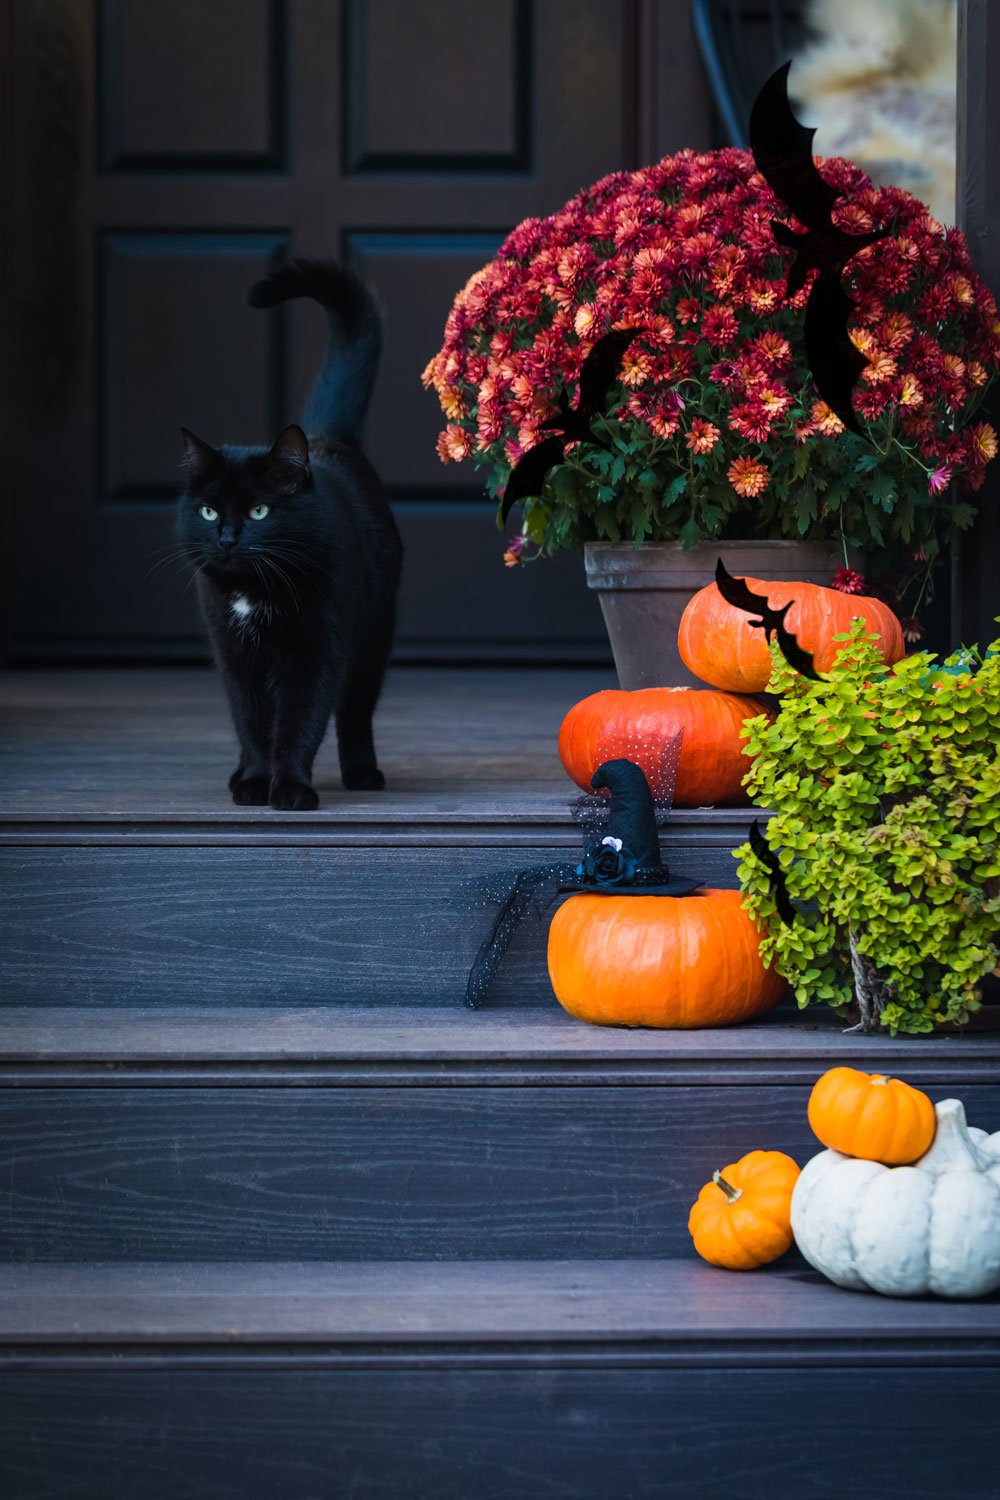 A black cat standing on the porch next to pumpkins